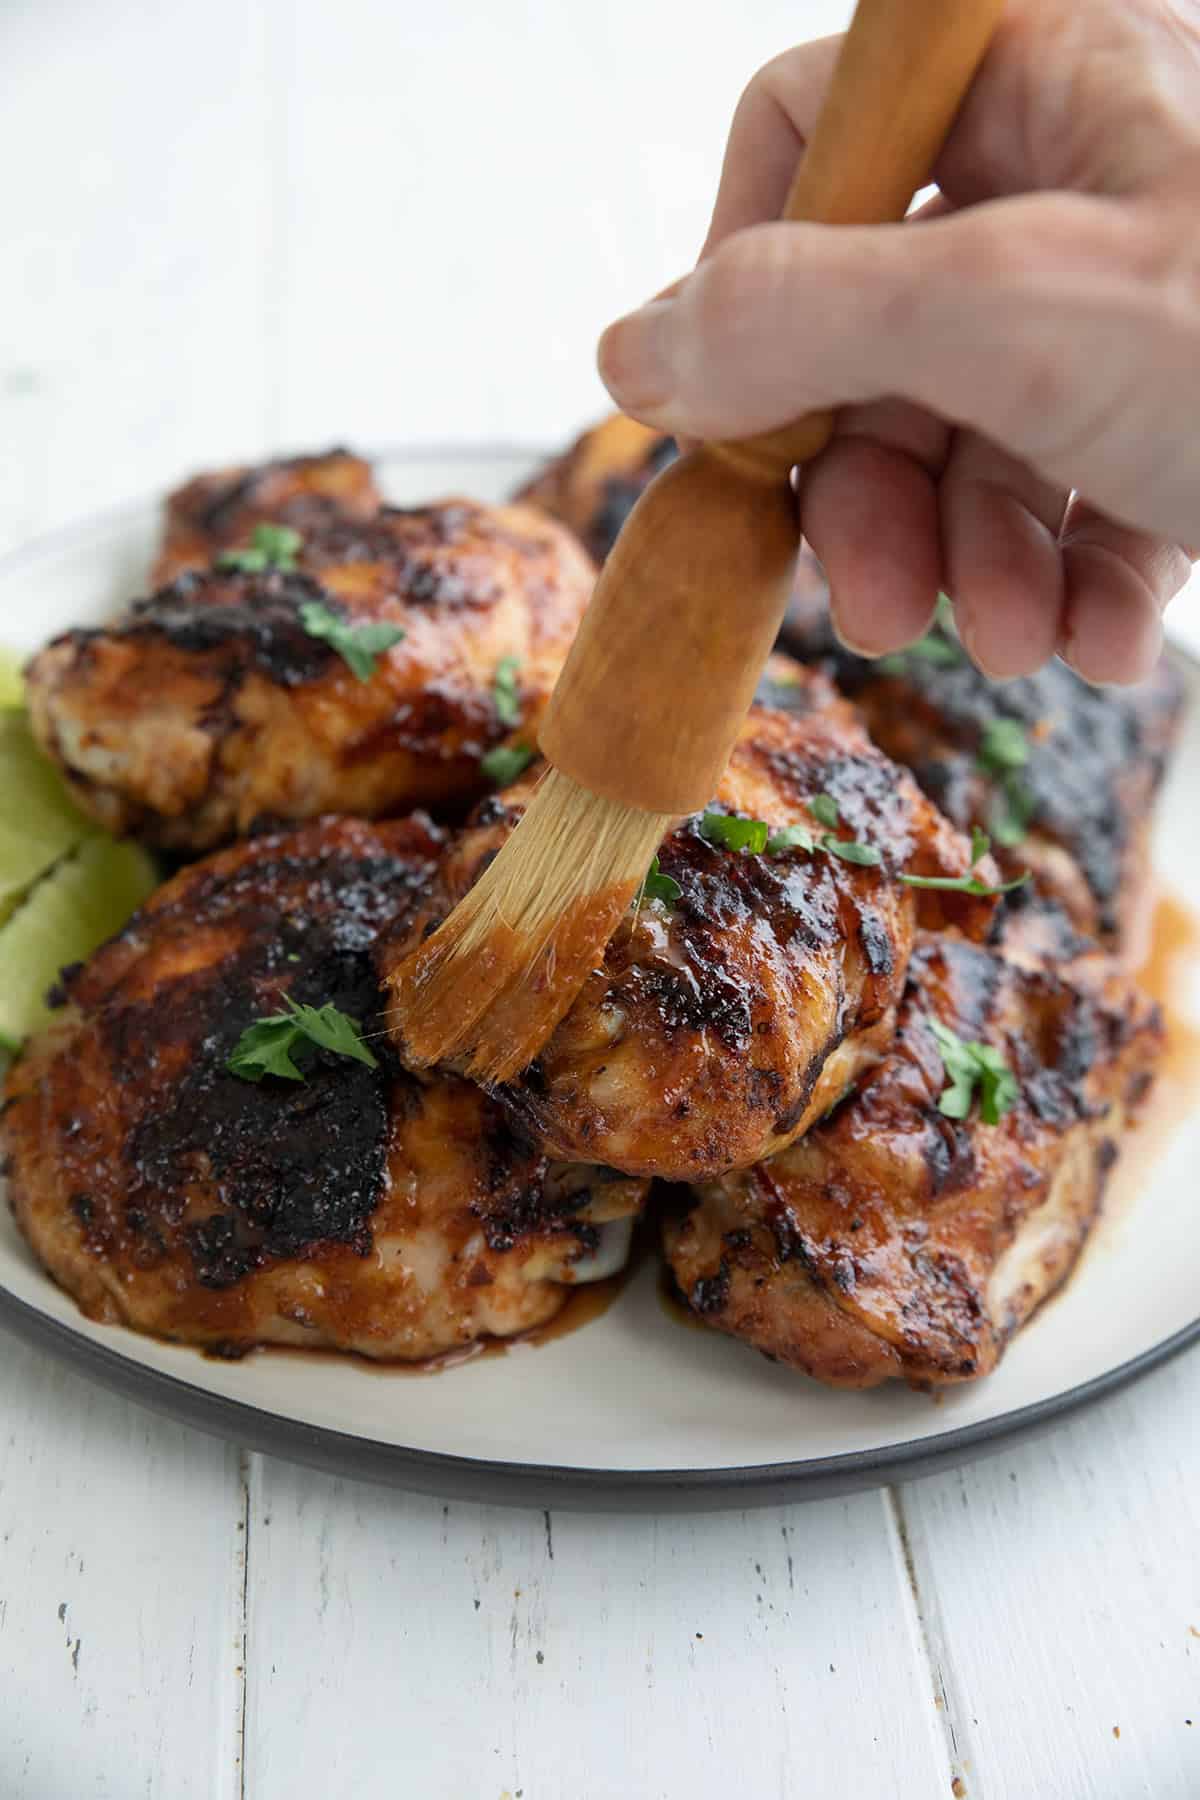 Chipotle lime marinade being brushed over grilled chicken thighs.